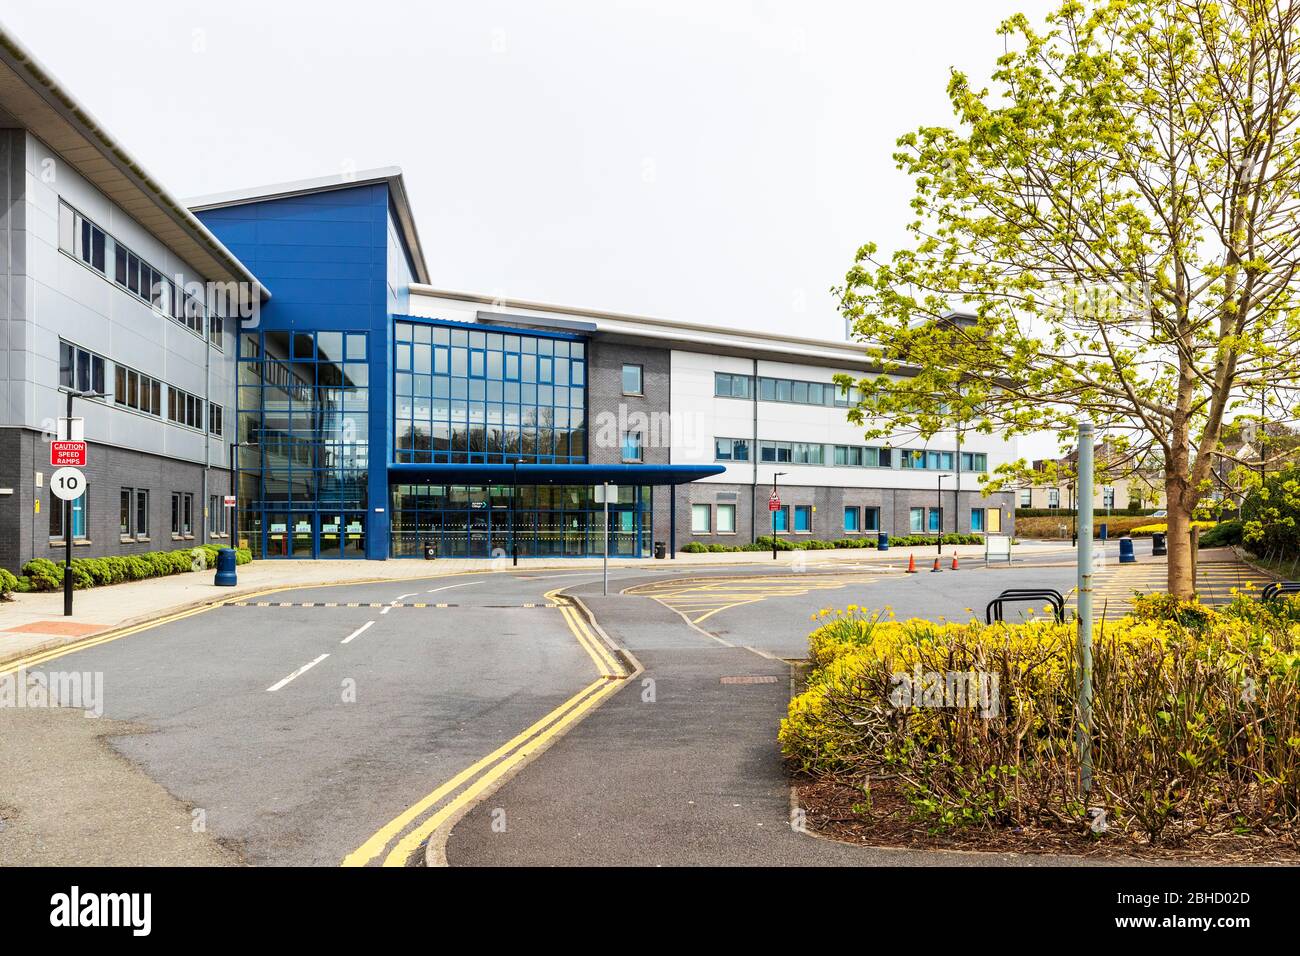 Ayrshire College, Kilwinning, Ayrshire, Scotland a college for tertiary and further education previously known as James Watt College Stock Photo